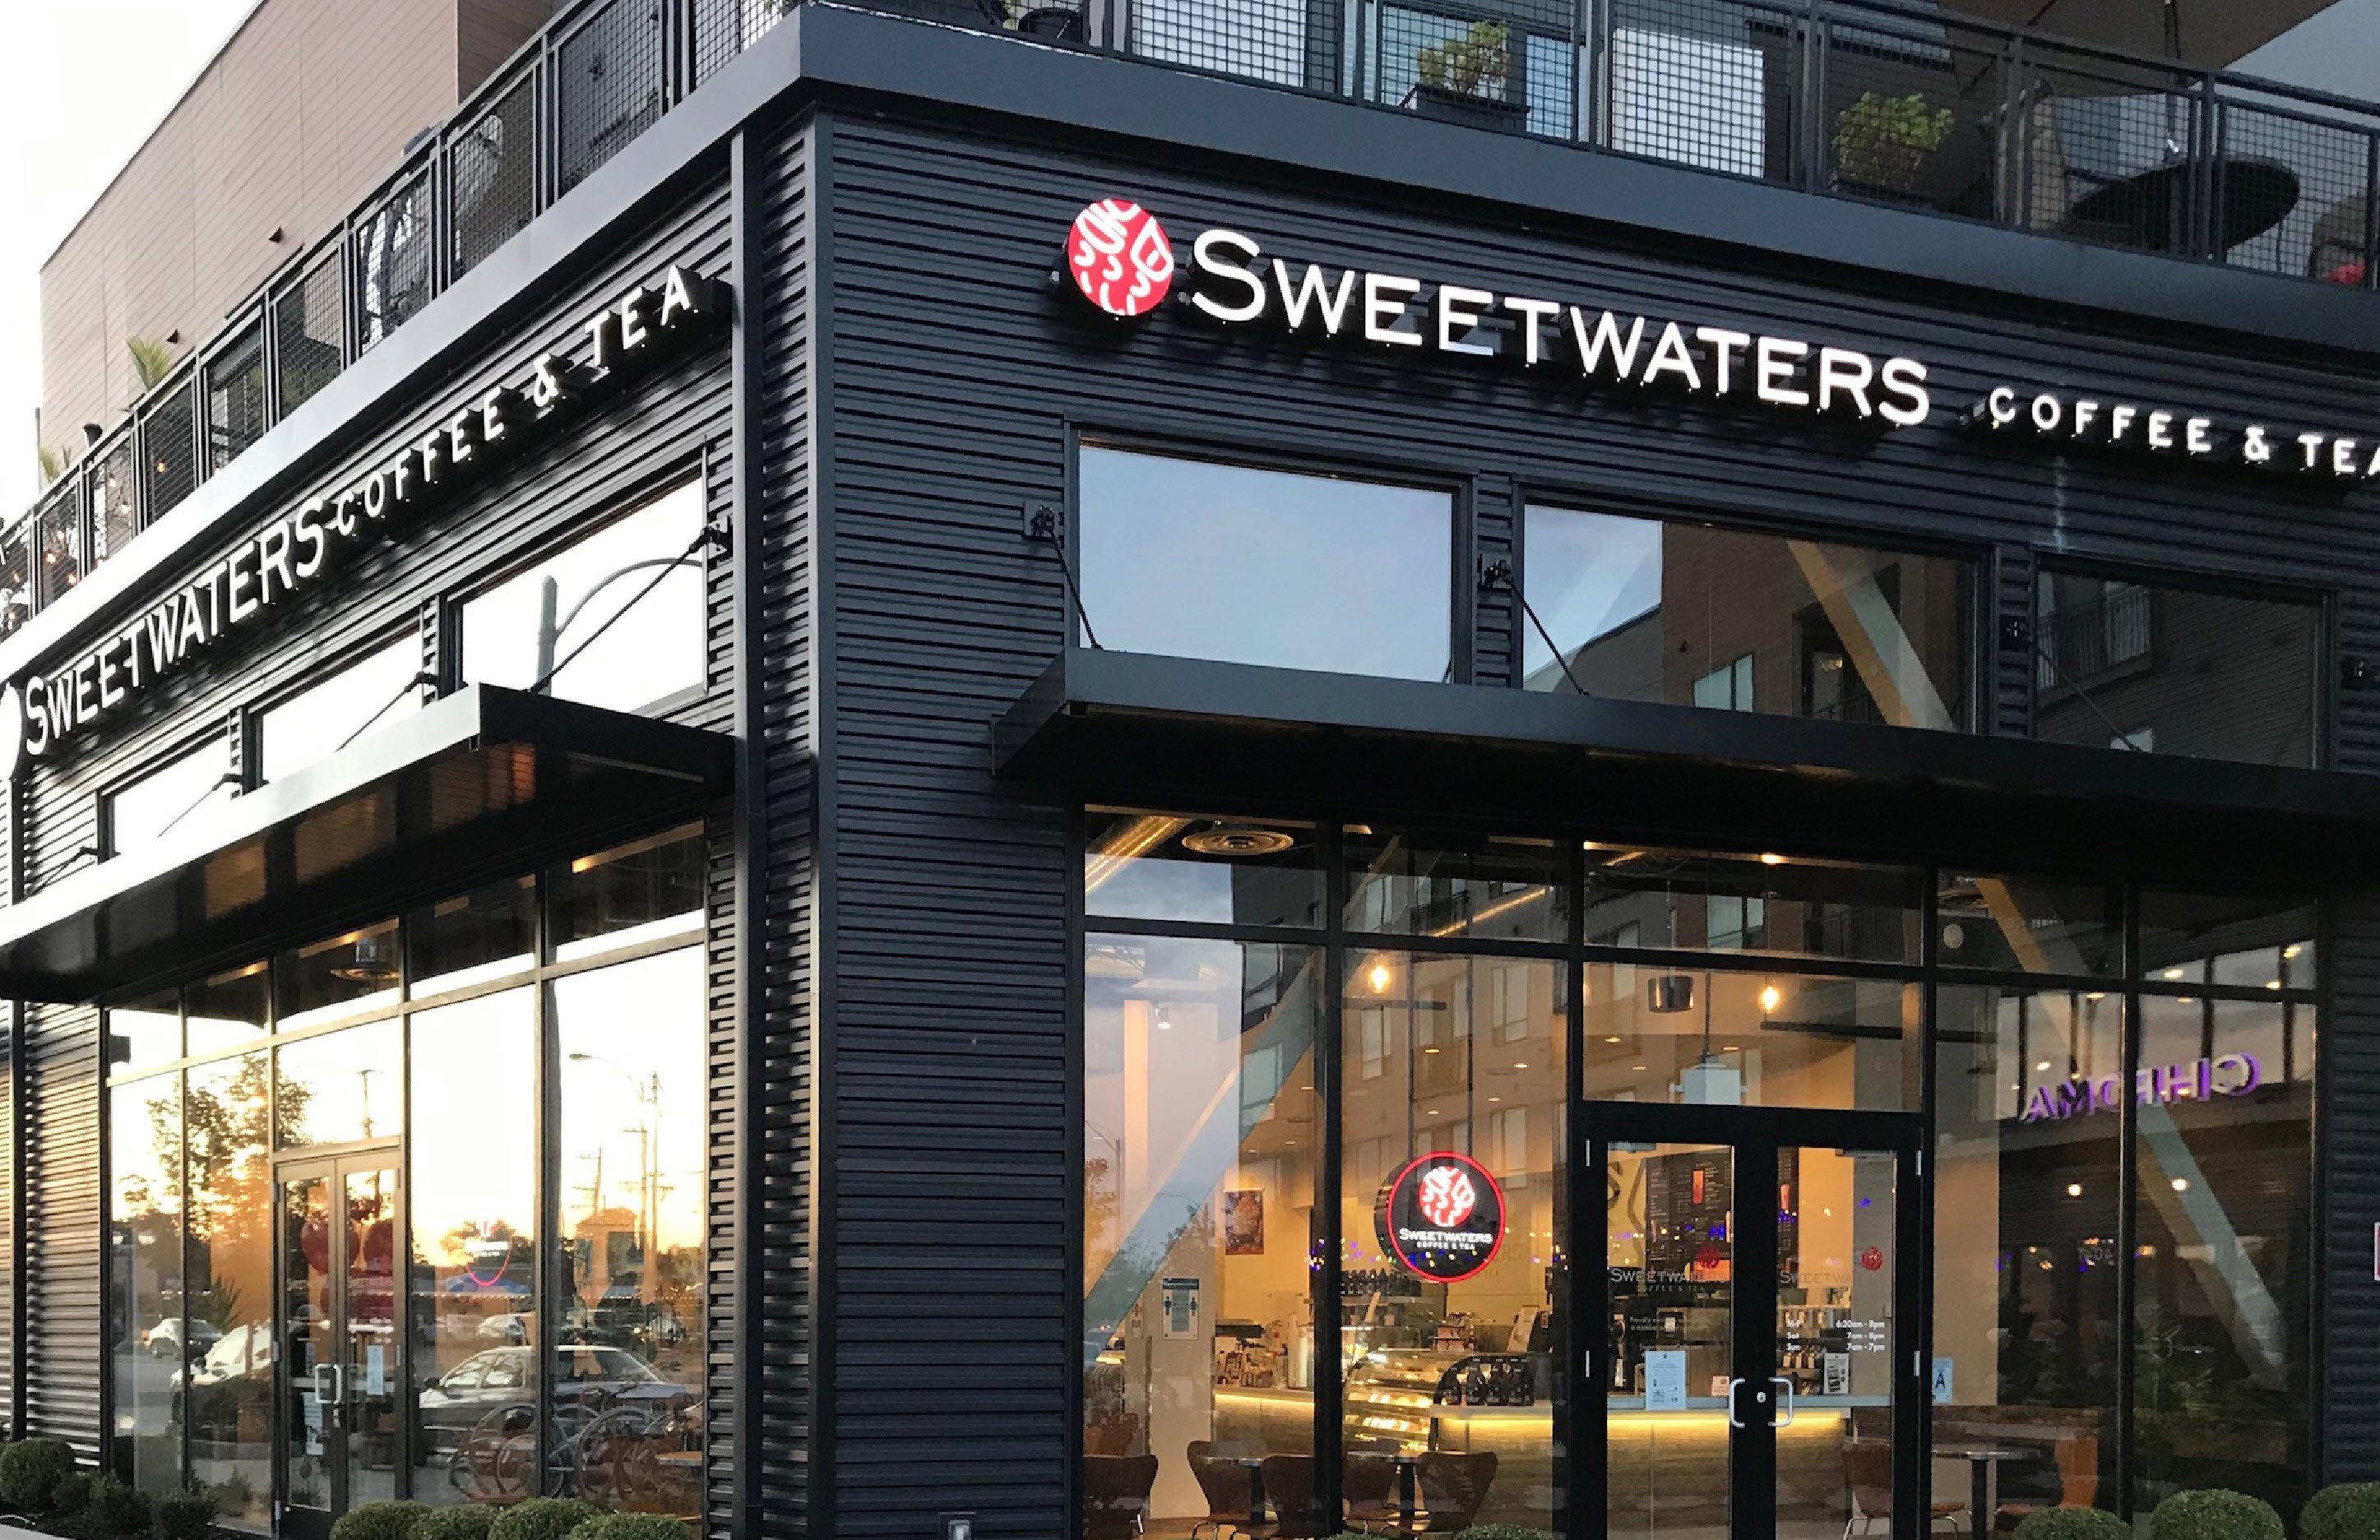 Sweetwaters Coffee  Tea - Win a Franchise Campaign